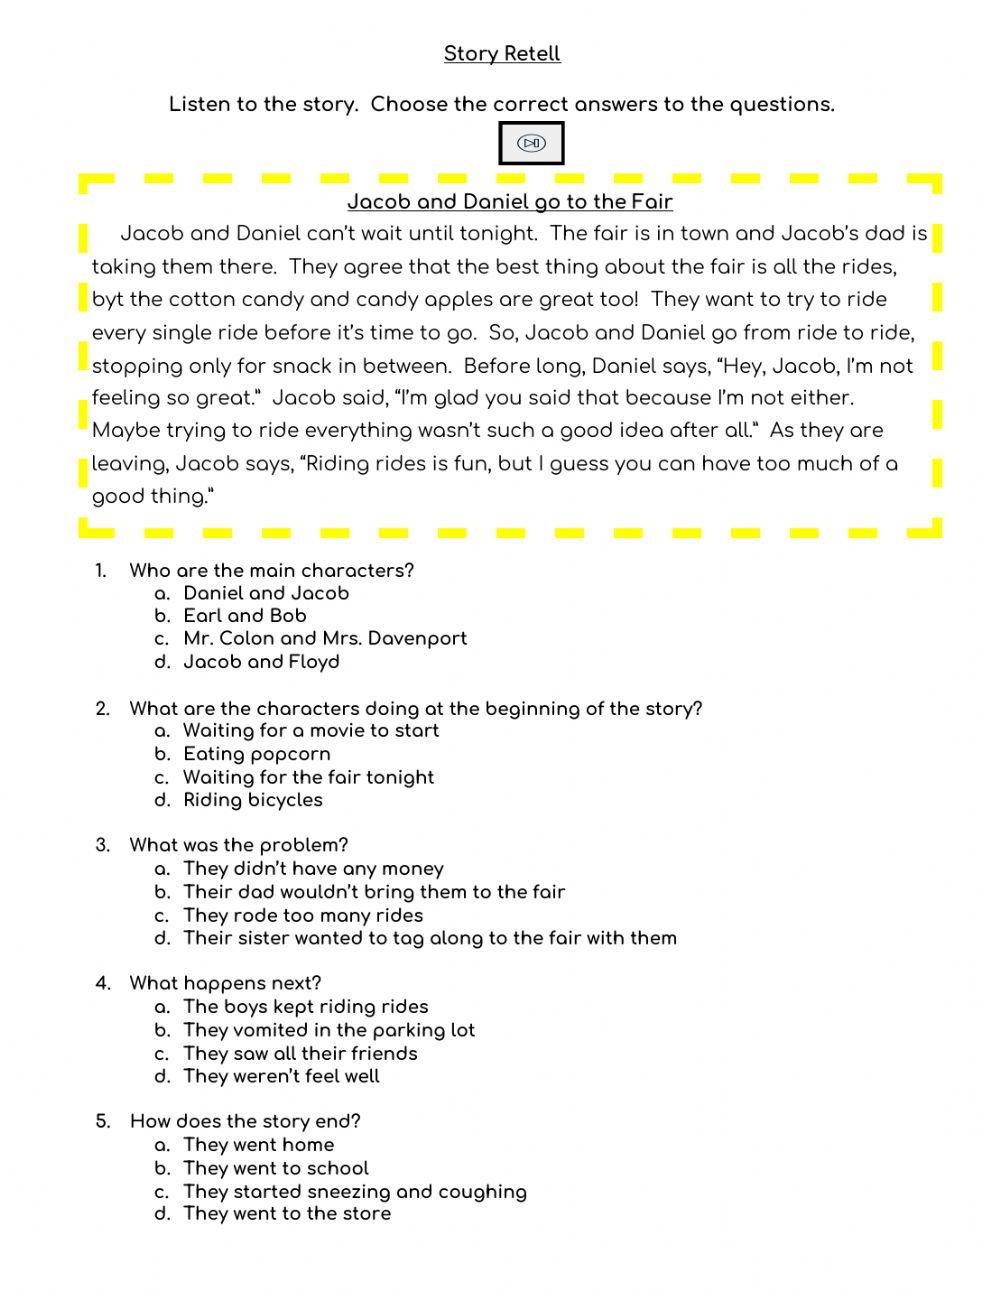 Story Retell- Jacob and Daniel go to the fair